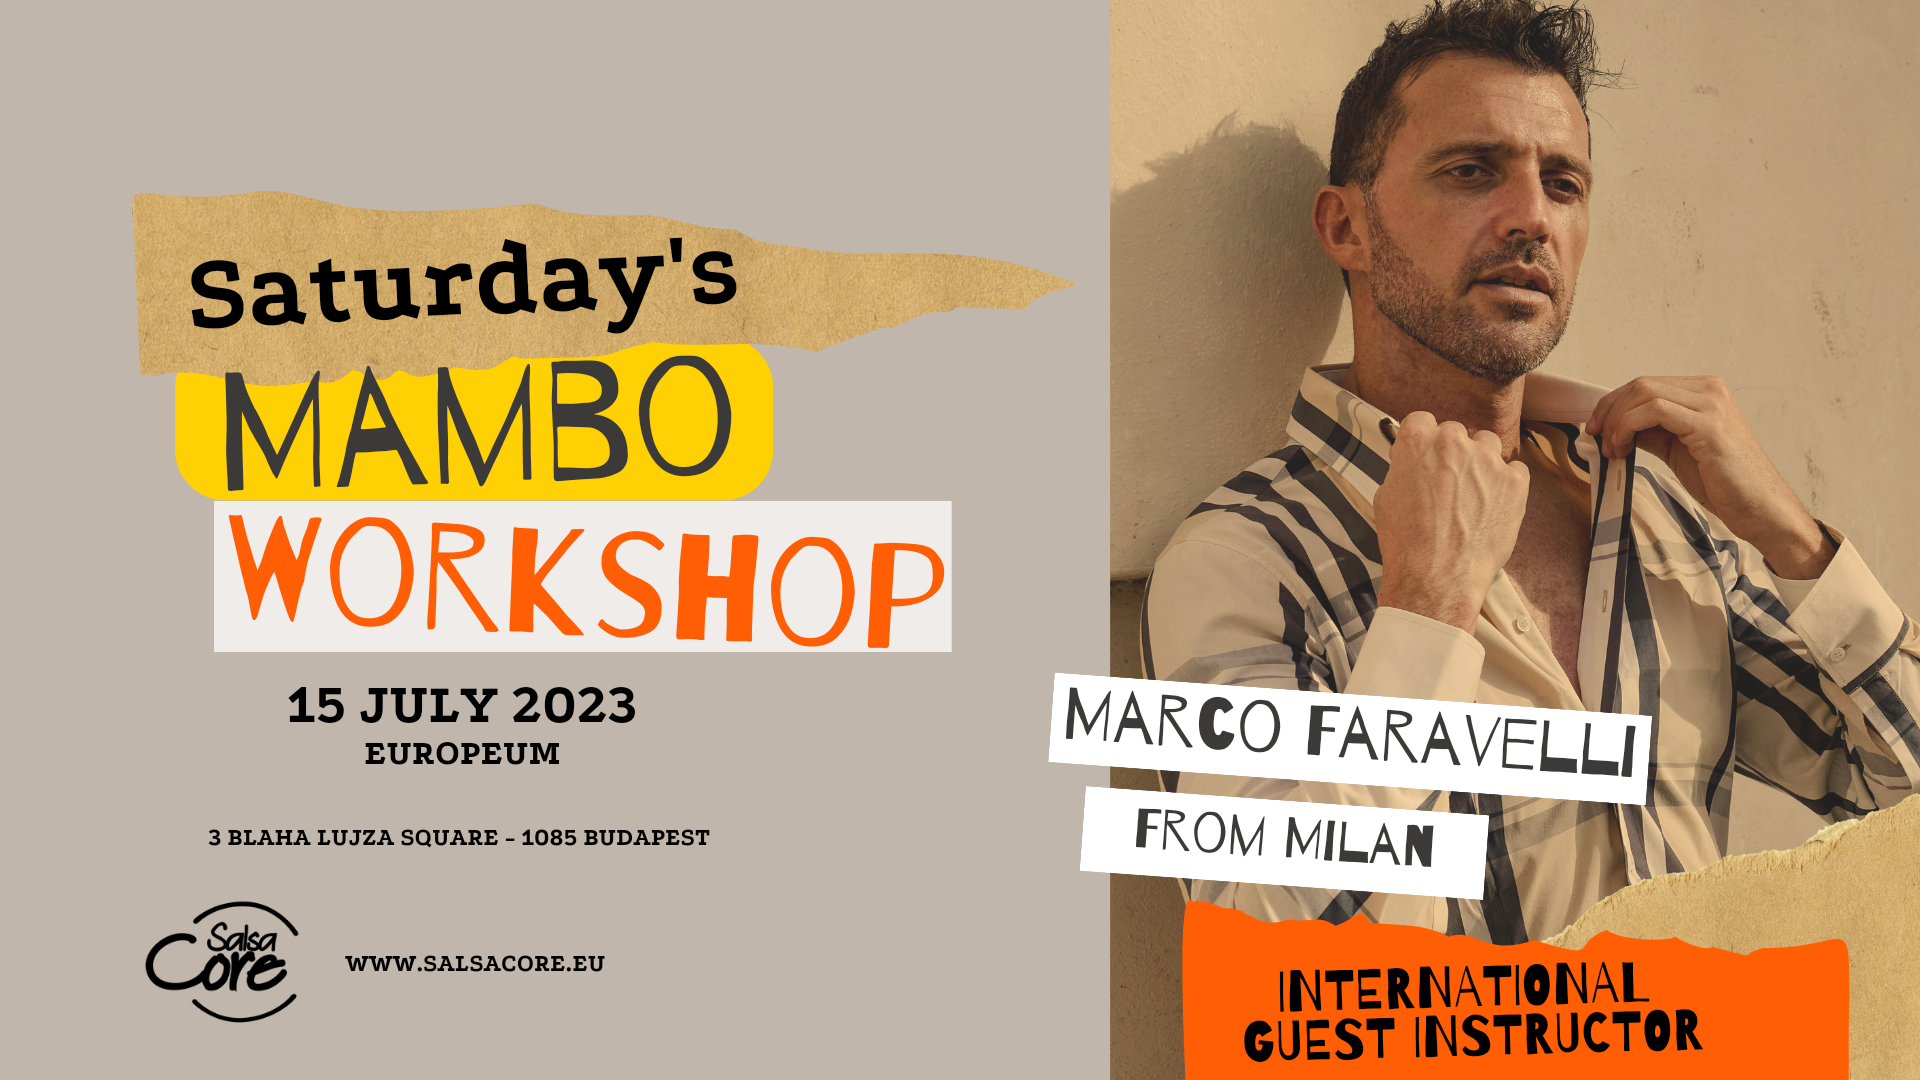 Mambo Workshop with Marco Faravelli from Milan